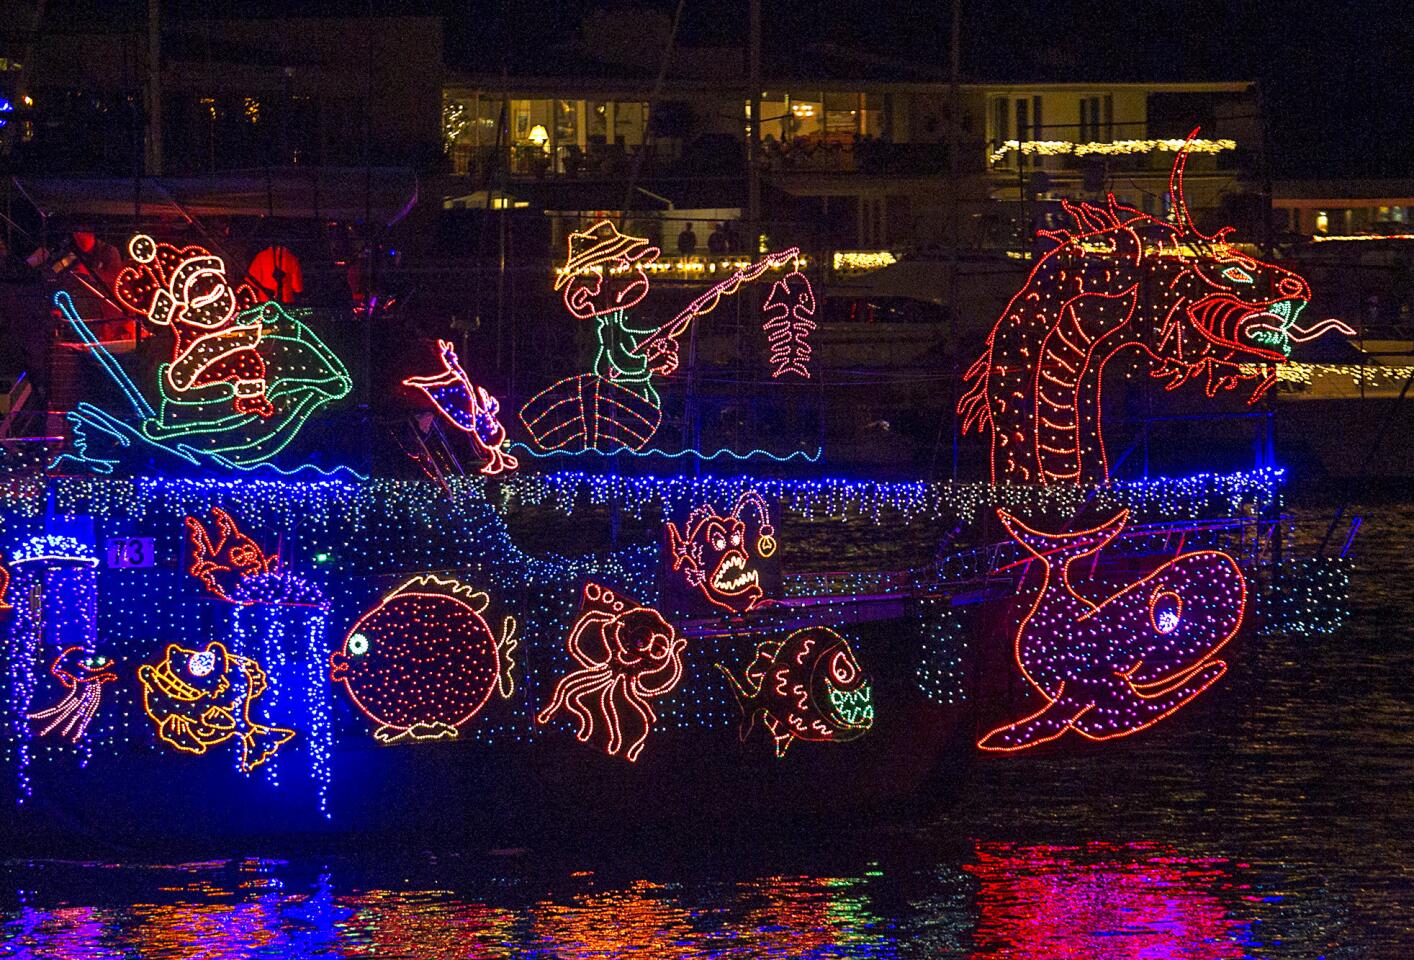 A vessel decked out with scary and fun creatures cruises by on Wednesday during opening night of the Newport Beach Christmas Boat Parade.